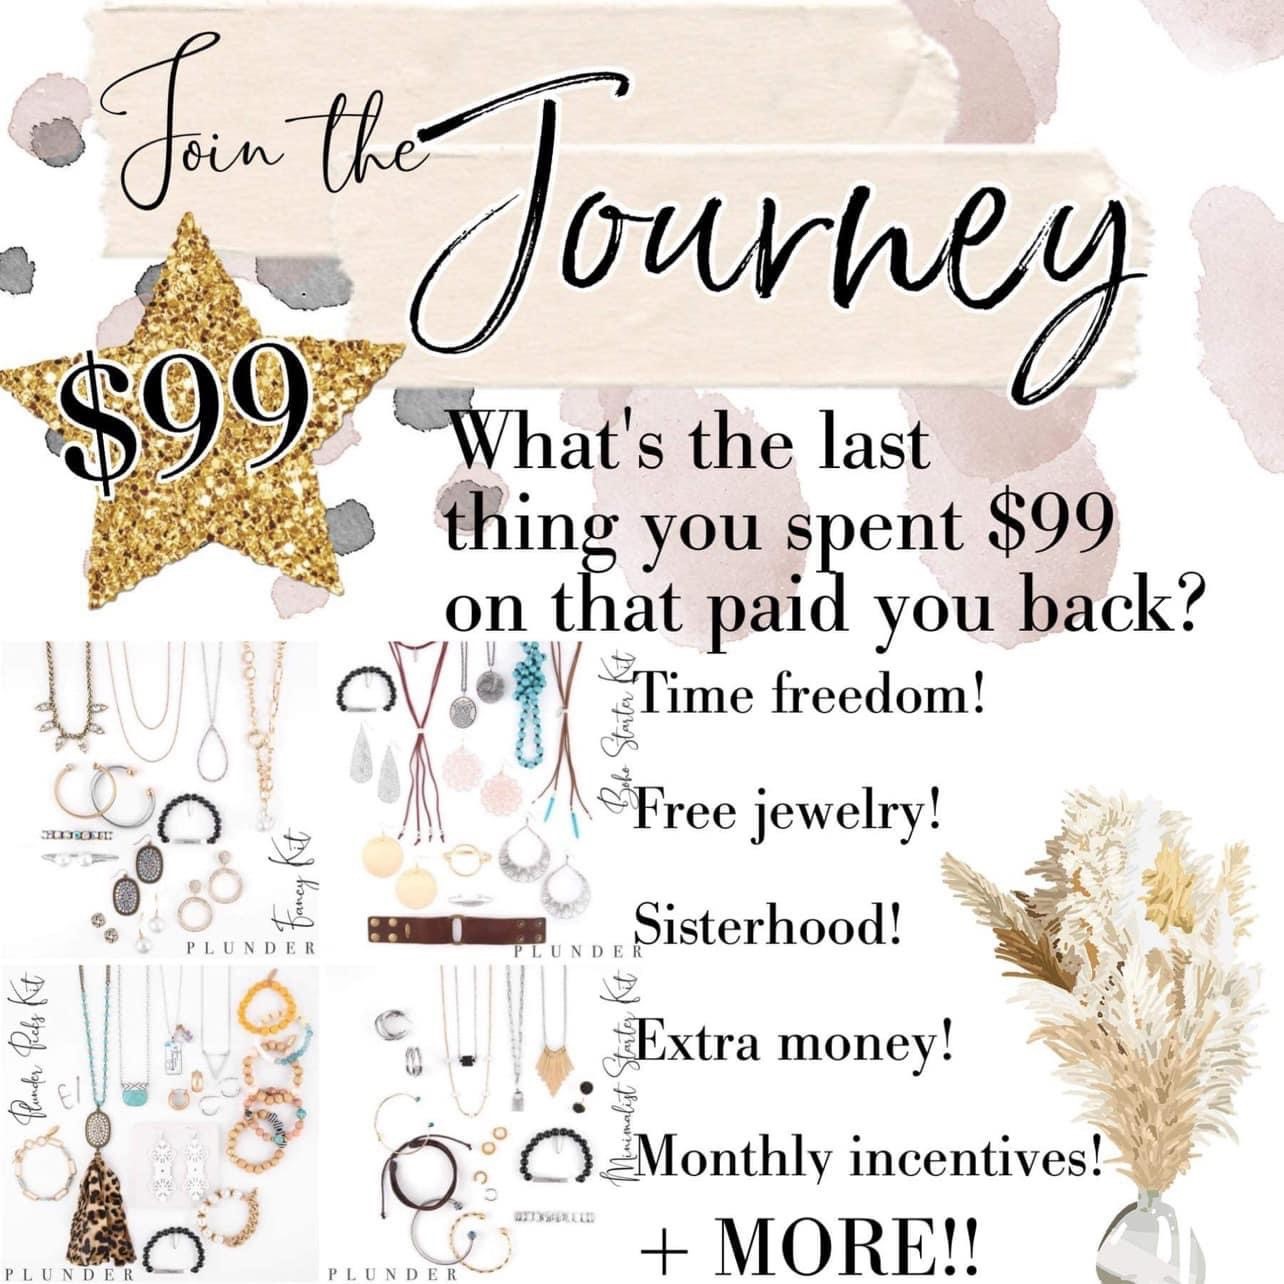 Plunder Design Stylist - Join The Journey
